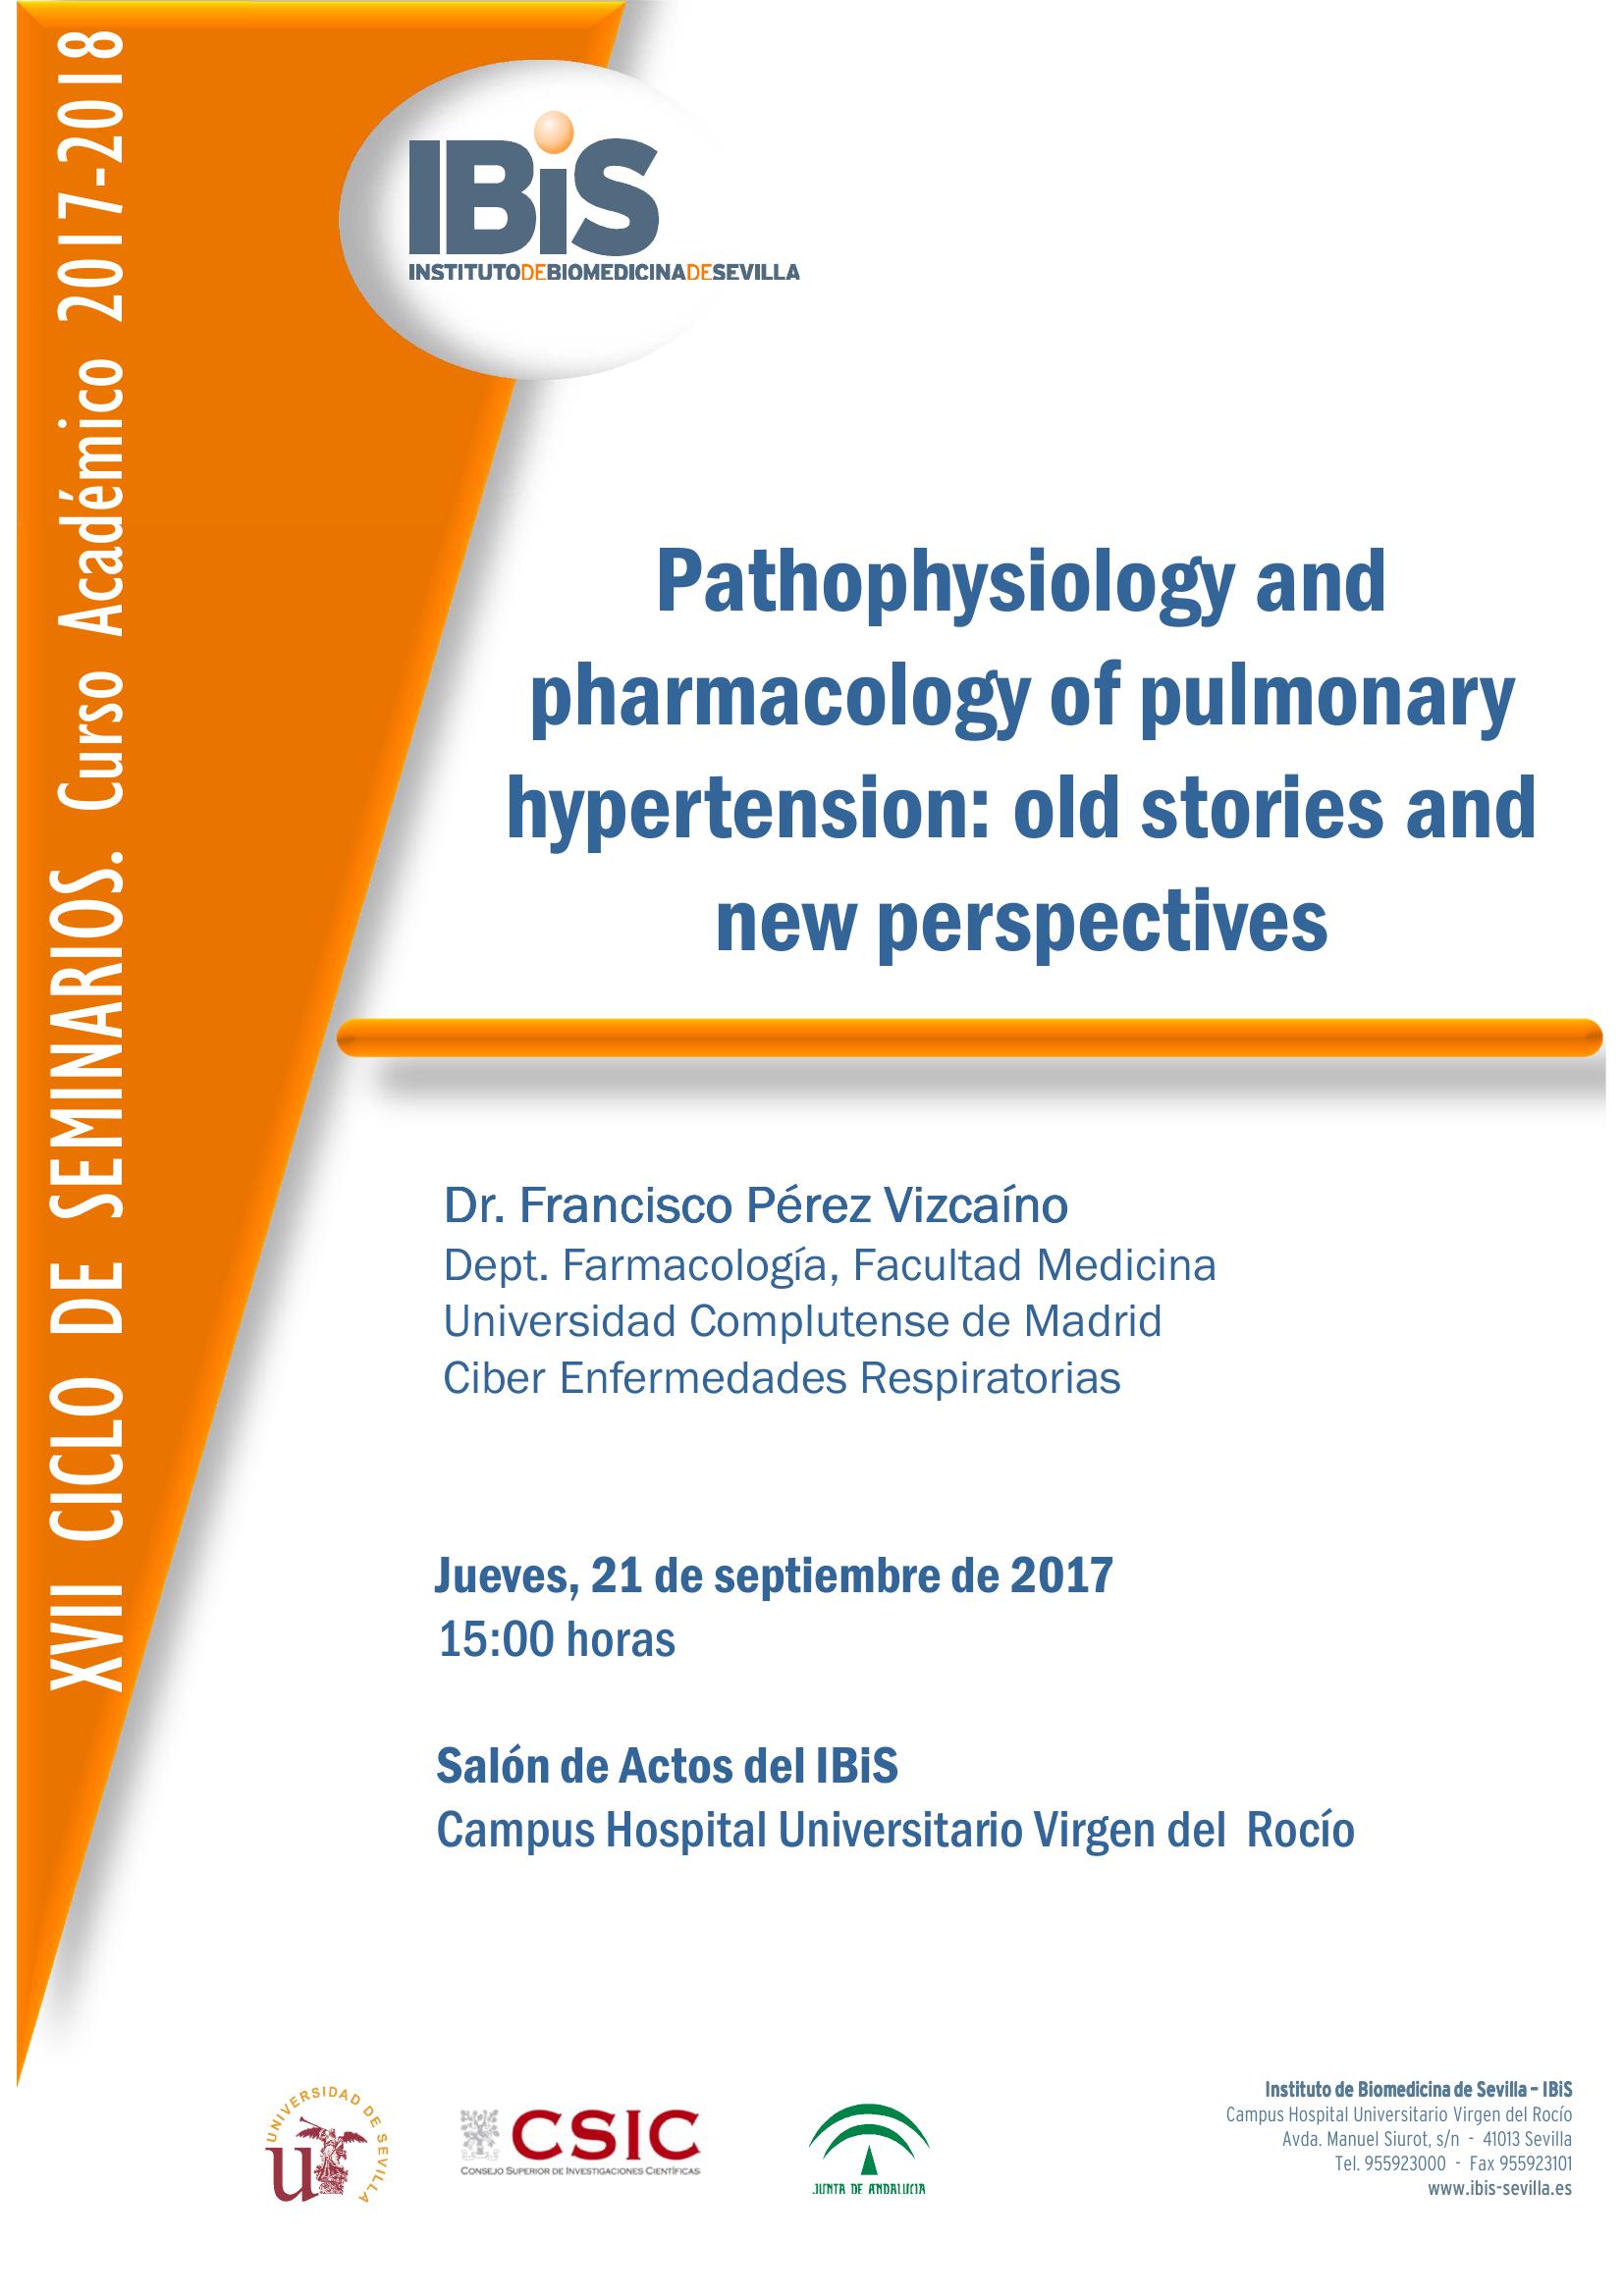 Poster: Pathophysiology and pharmacology of pulmonary hypertension: old stories and new perspectives